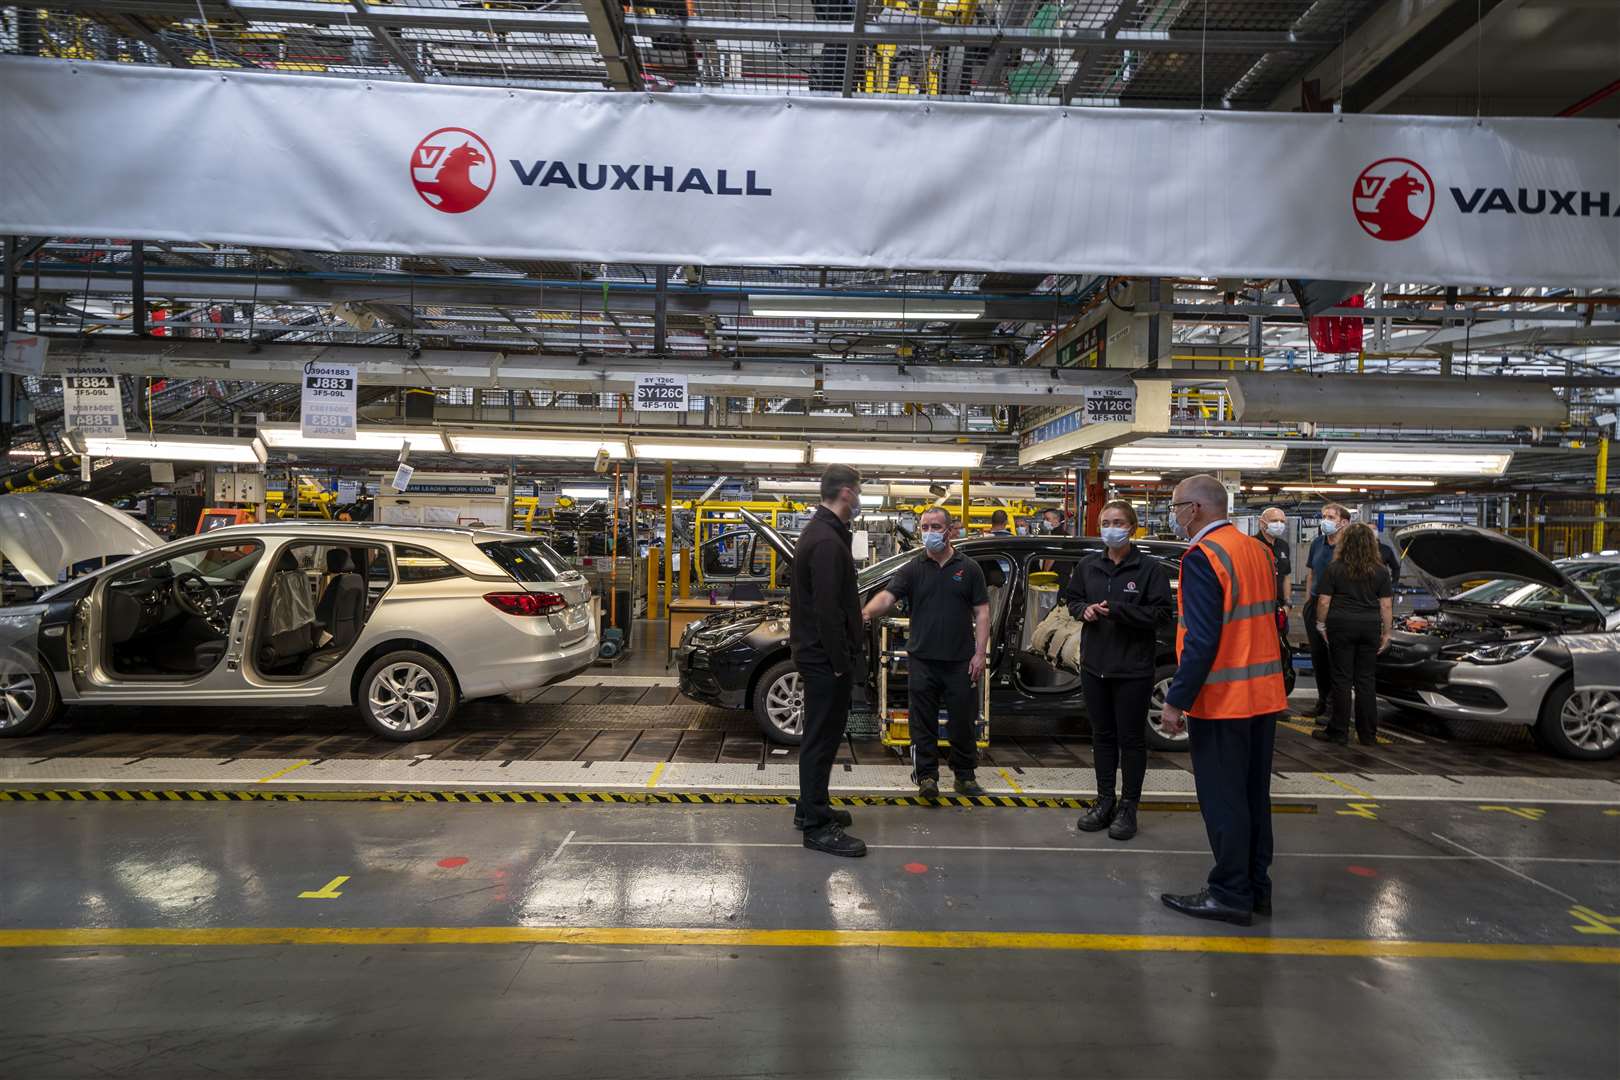 The Astra assembly line at Vauxhall’s plant in Ellesmere Port, Cheshire (Peter Byrne/PA)